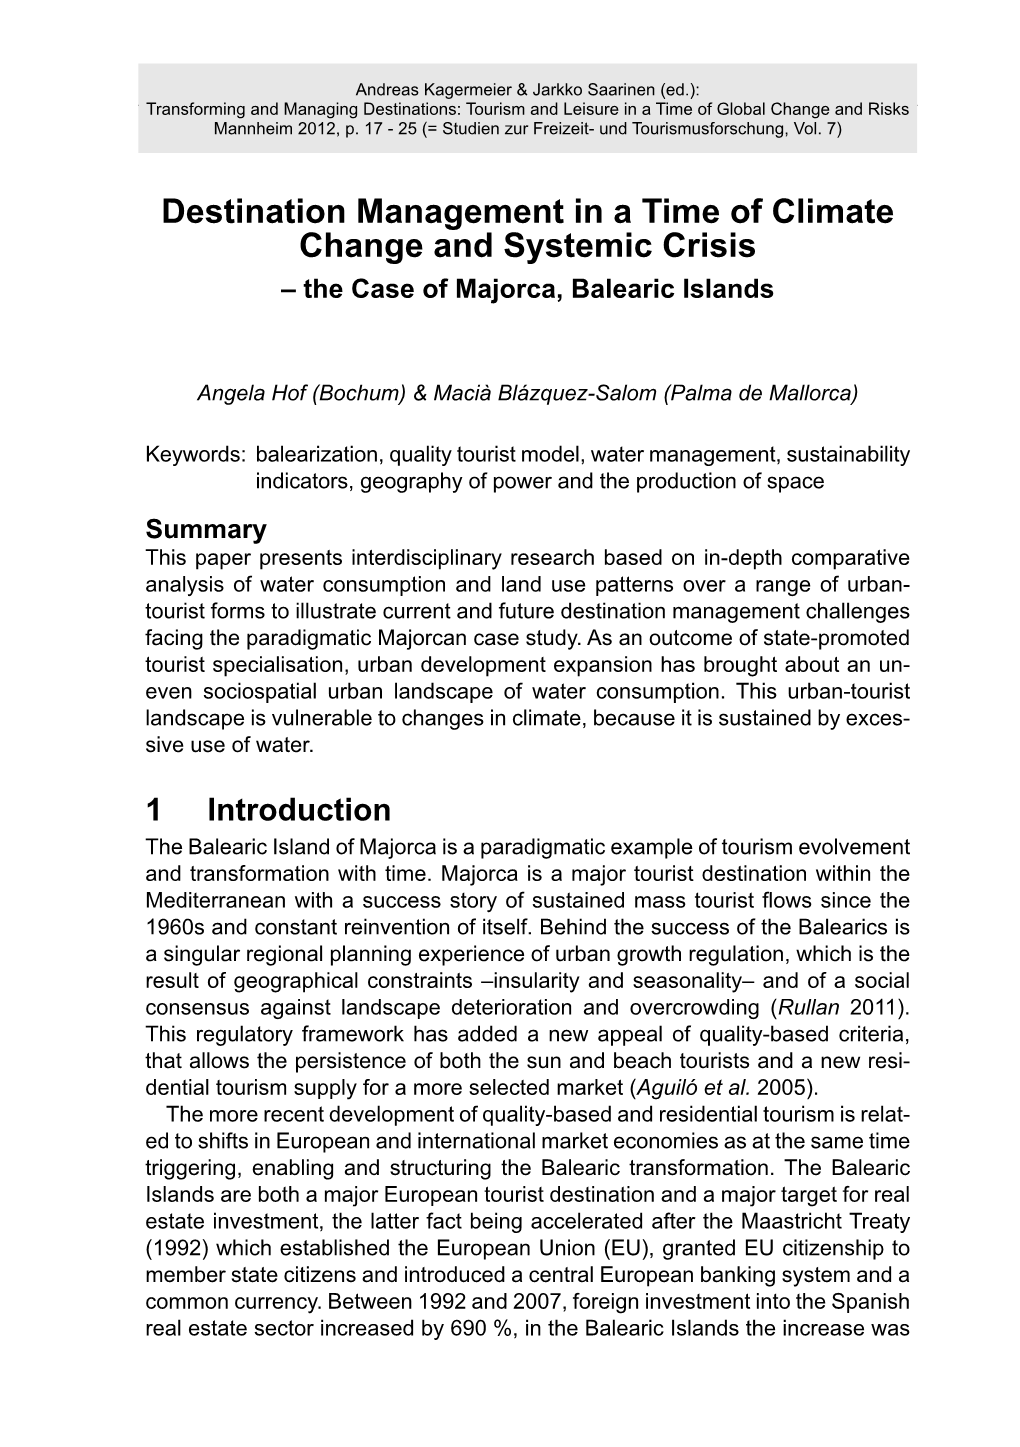 Destination Management in a Time of Climate Change and Systemic Crisis – the Case of Majorca, Balearic Islands